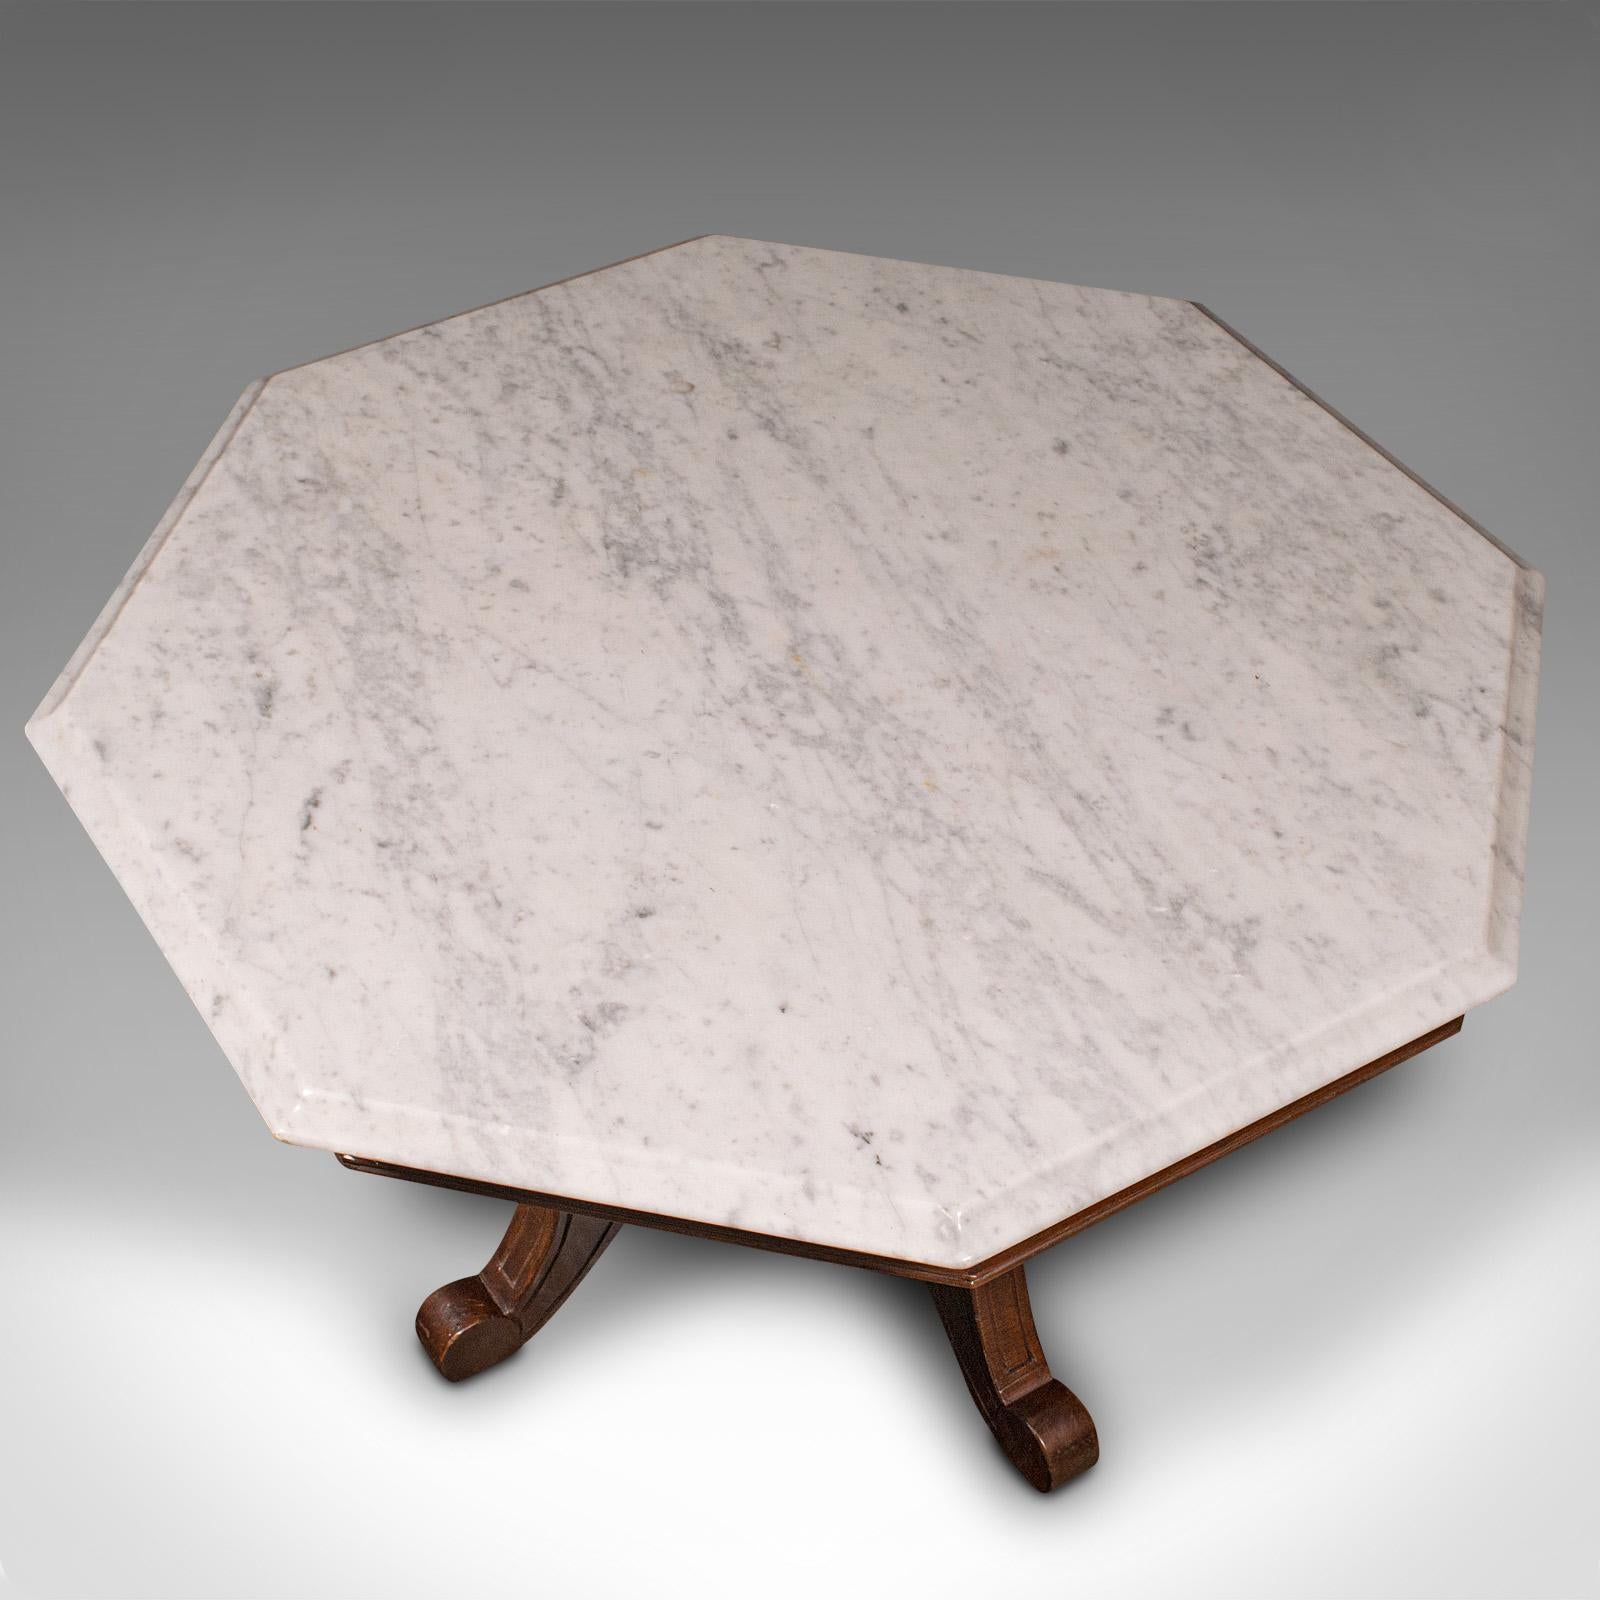 19th Century Antique Octagonal Coffee Table, English, Carrara Marble, Decorative, Victorian For Sale